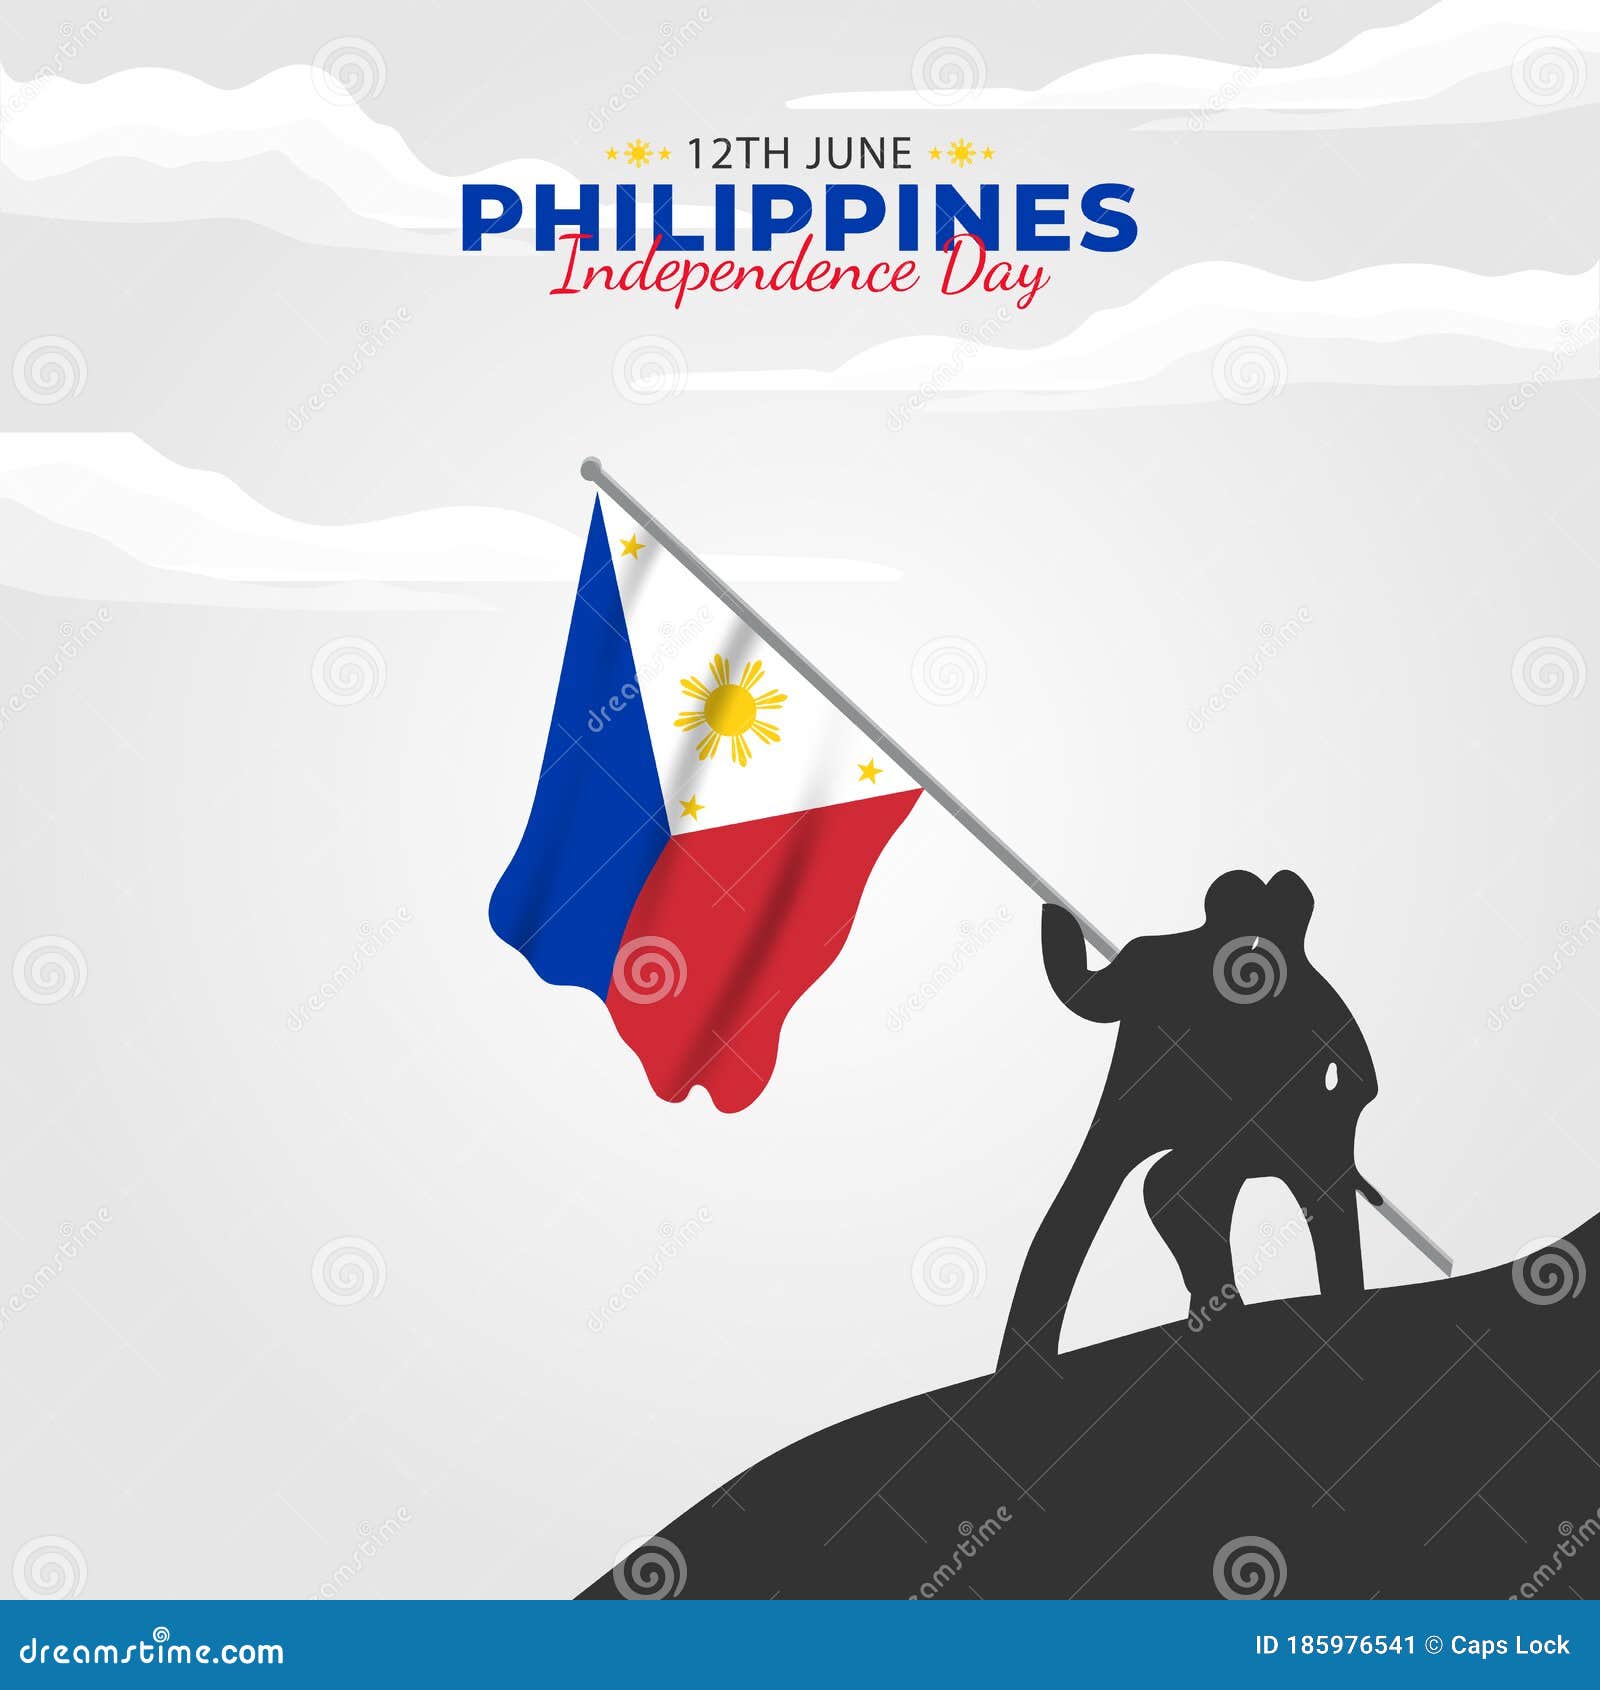 Philippine Independence Day Celebrated Annually On June 12 In Philippine Happy National Holiday Of Freedom Patriotic Poster Stock Vector Illustration Of Country Flags